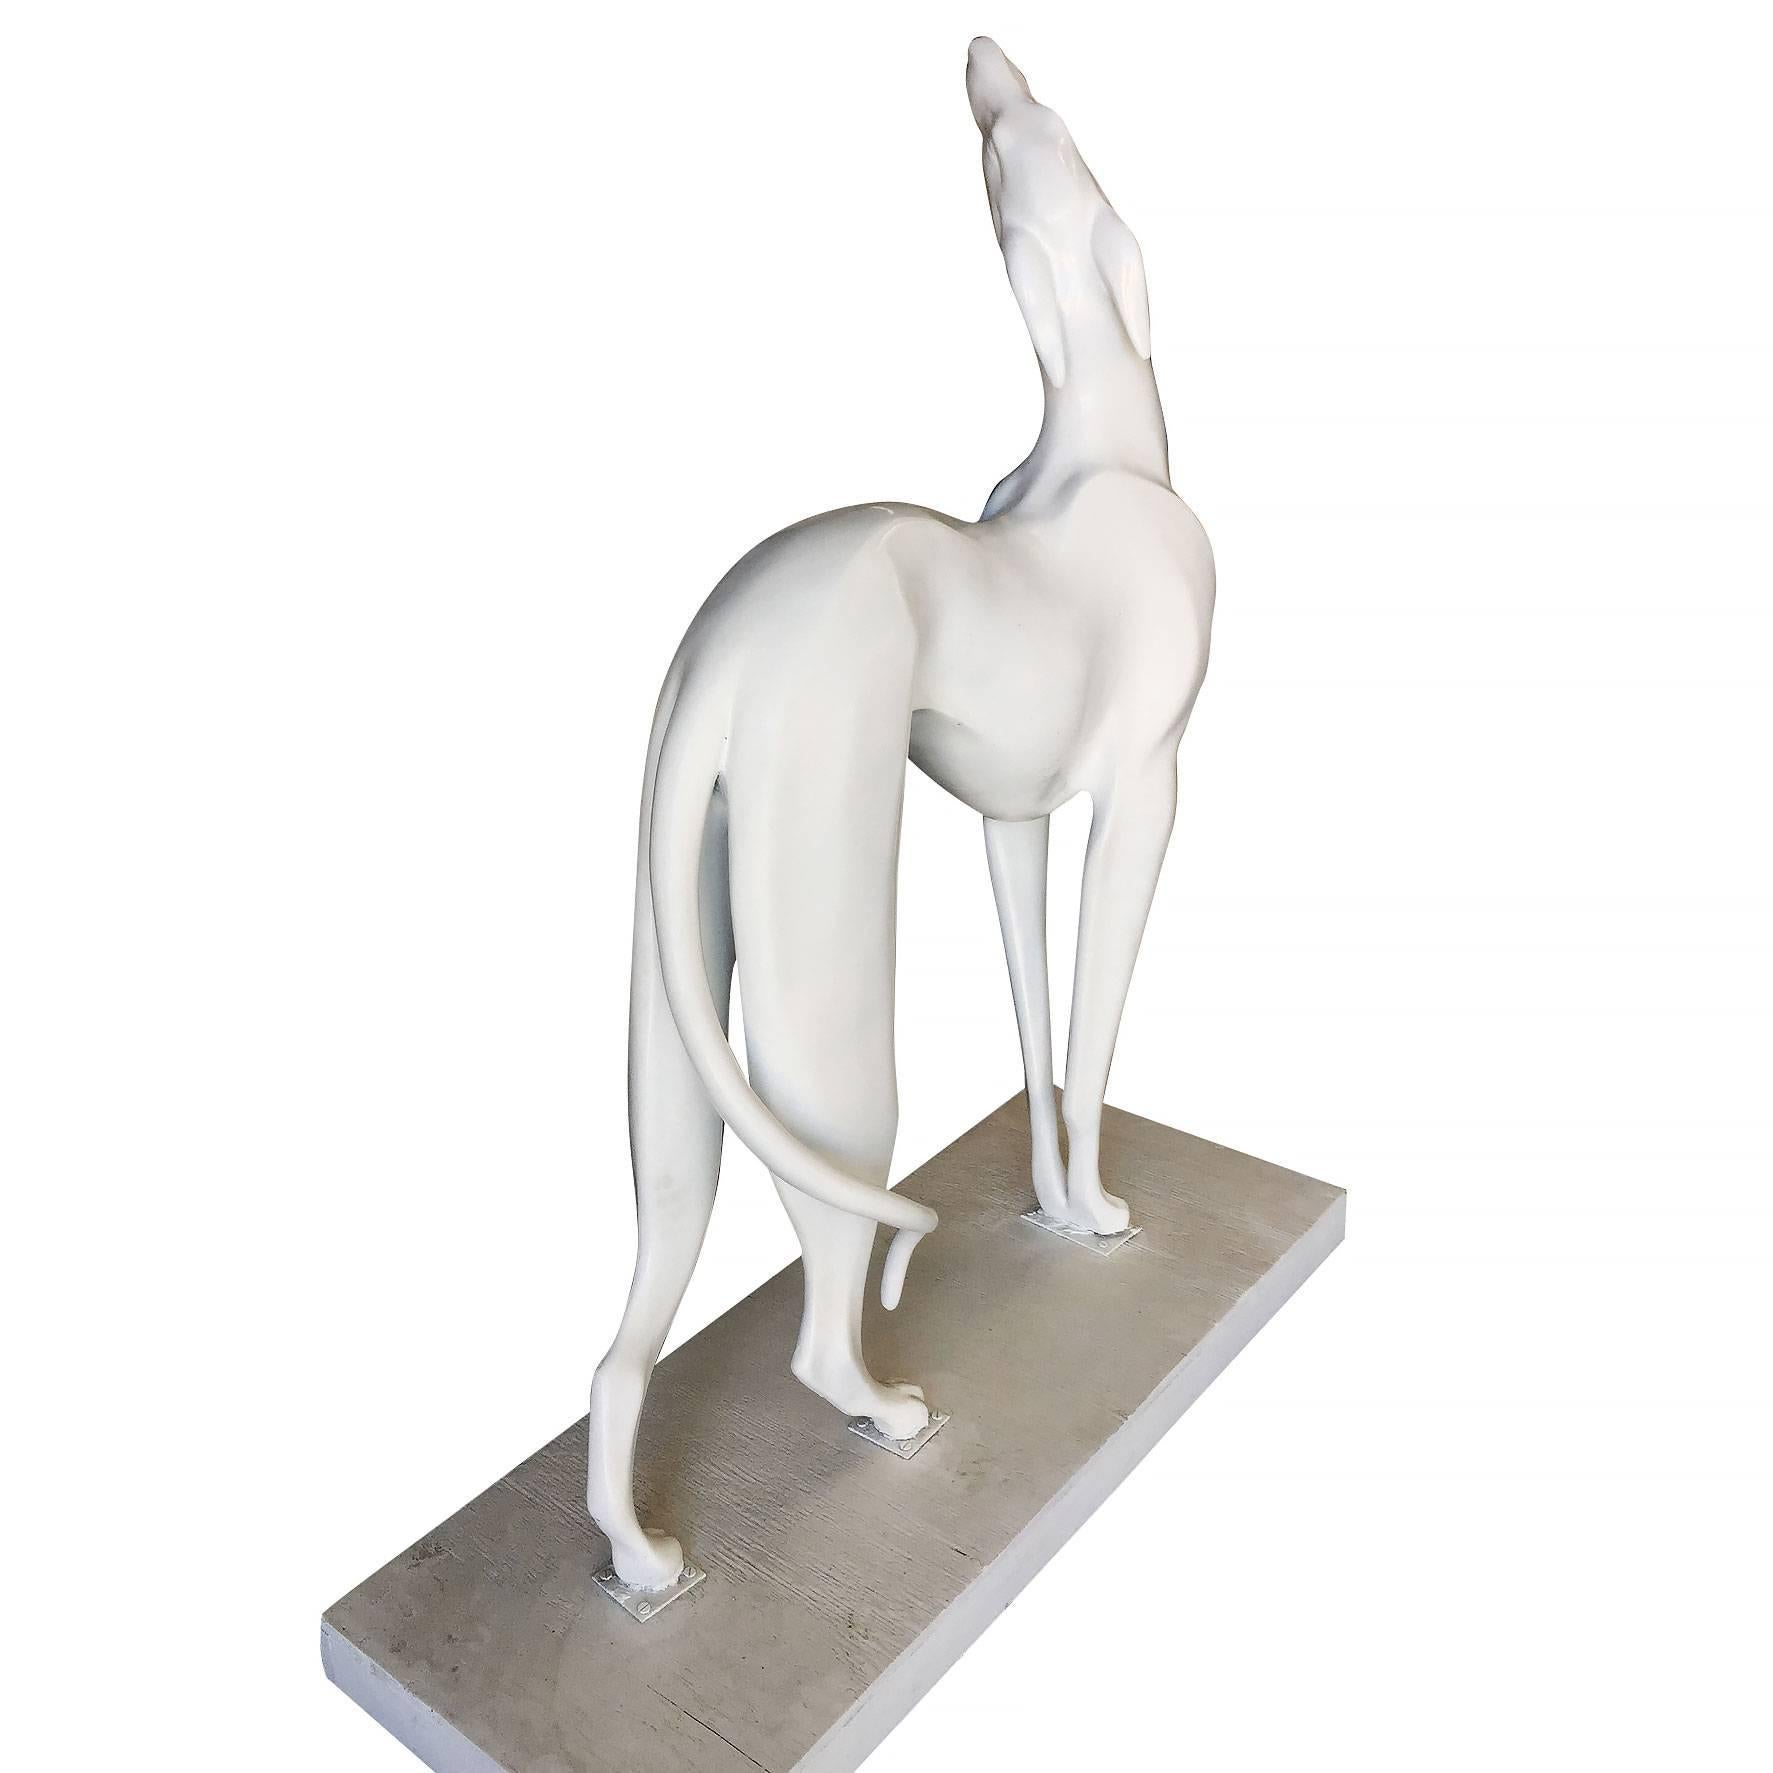 Life-sized Art Deco style greyhound figural statue for indoor and outdoor use.

The famous big white dog in Chandler and Joey’s apartment actually belonged to Jennifer Aniston. A friend gave it to her as a good-luck gift when she secured the role.